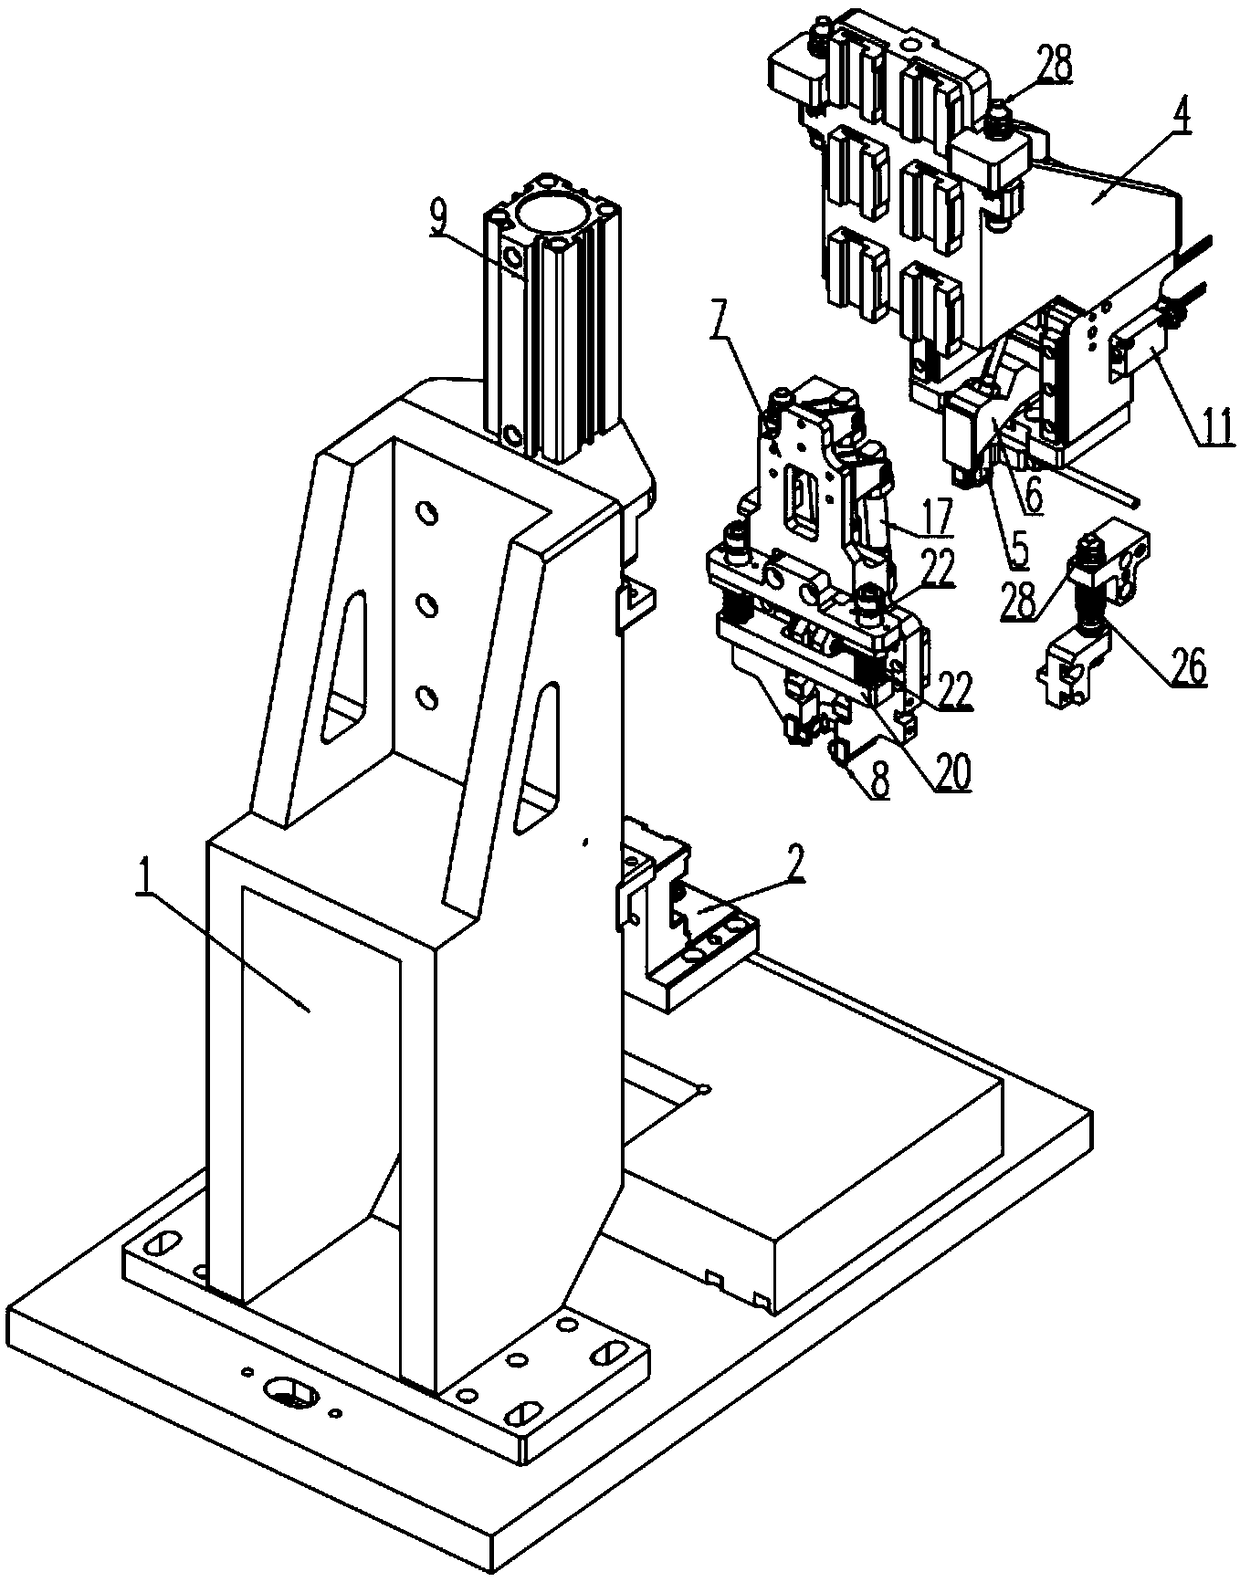 Equipment used for conducting positioning and pressure maintaining on L-shaped part